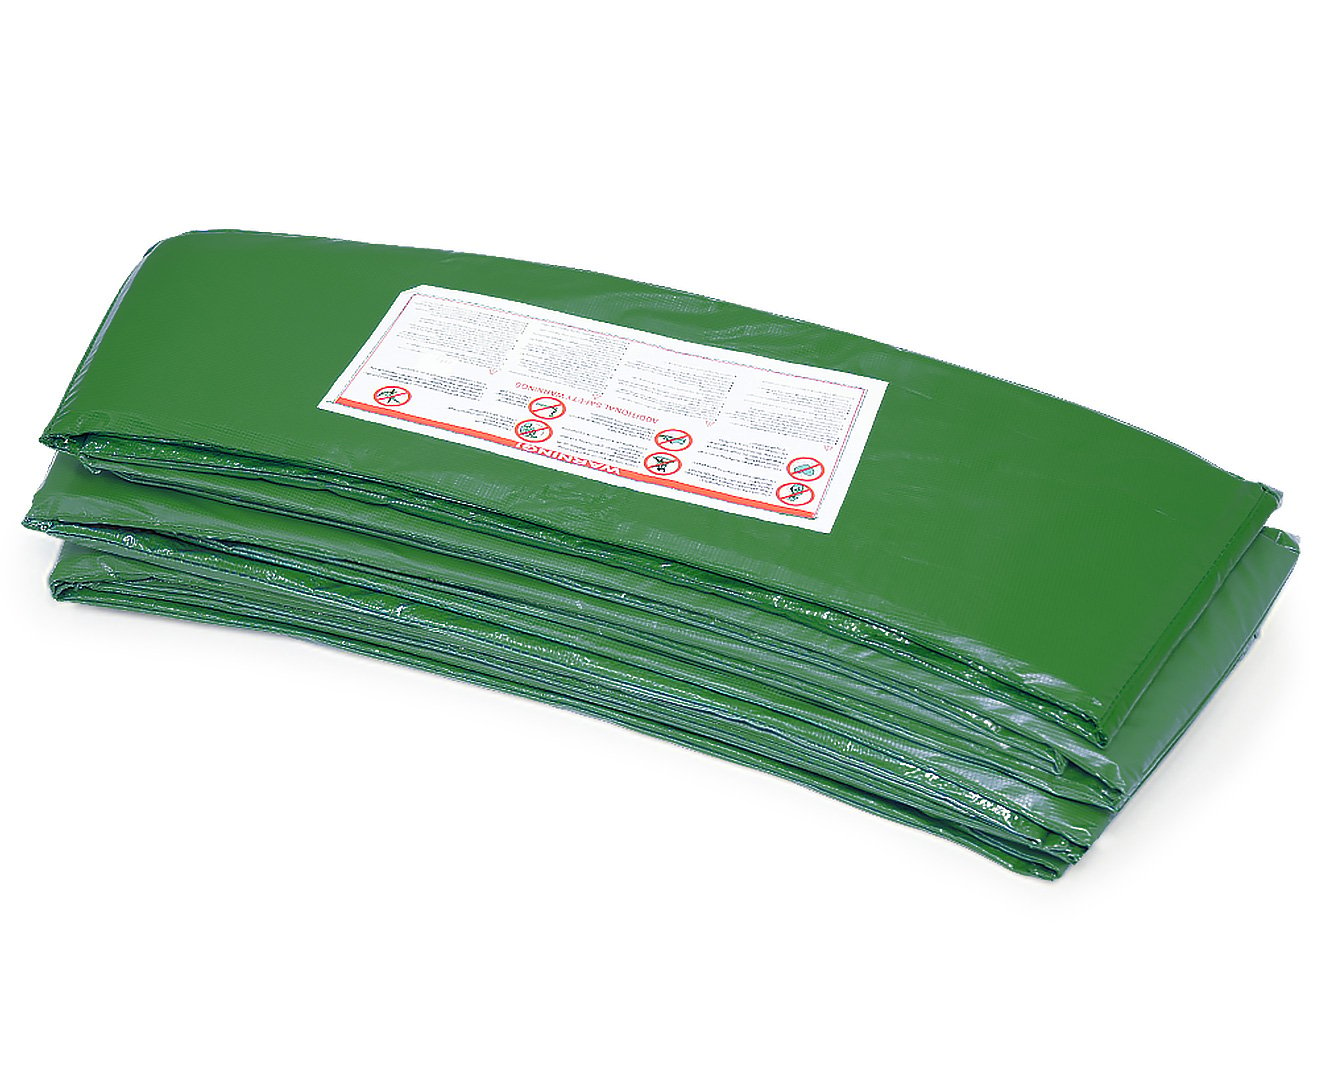 08ft Trampoline Replacement Safety Pad and Net Round 6 Poles Green 2